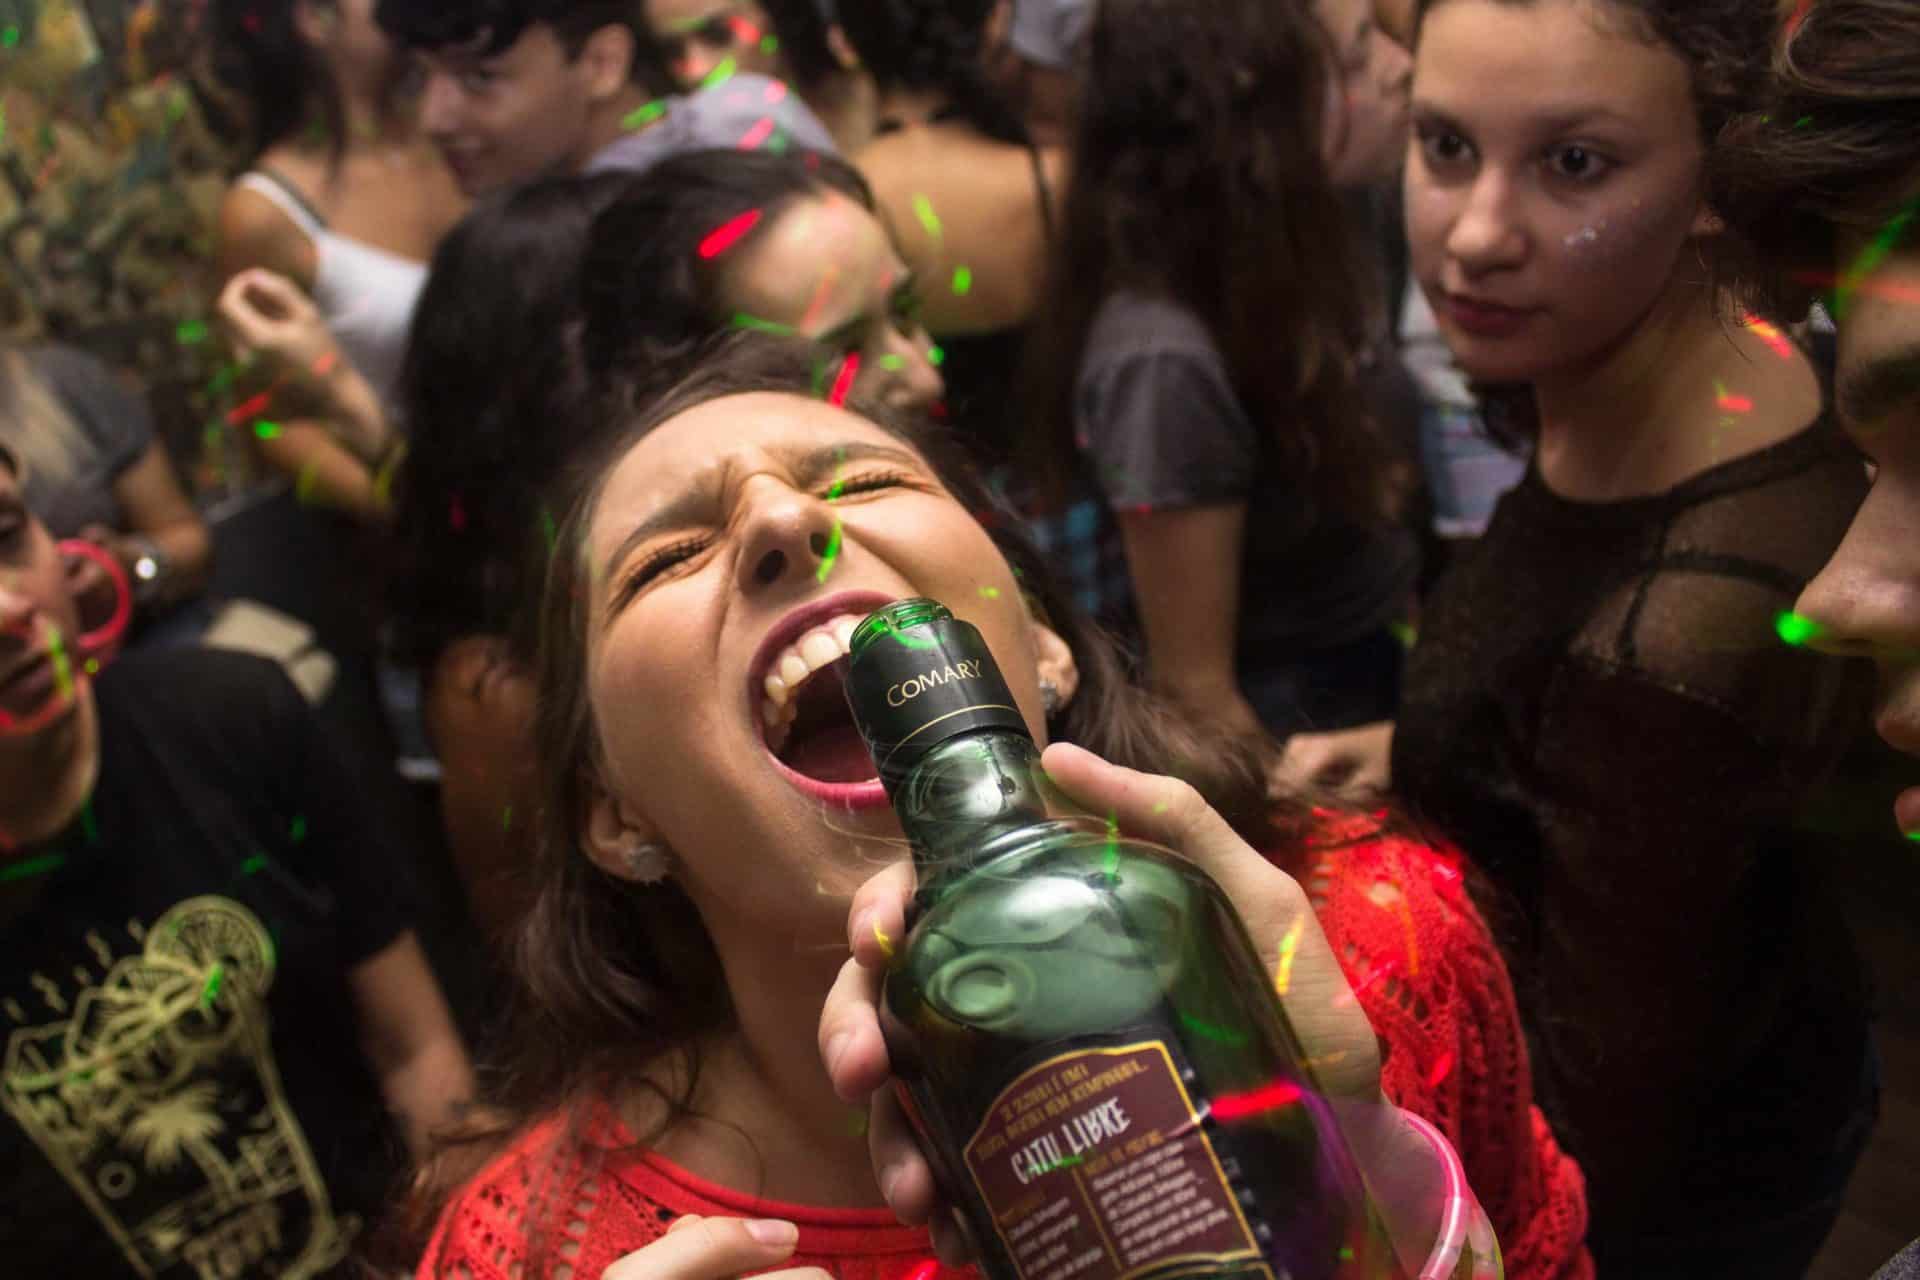 A young woman drinking liquor straight from the bottle at a party symbolizes the inadequate view of man that underpins the environment crisis